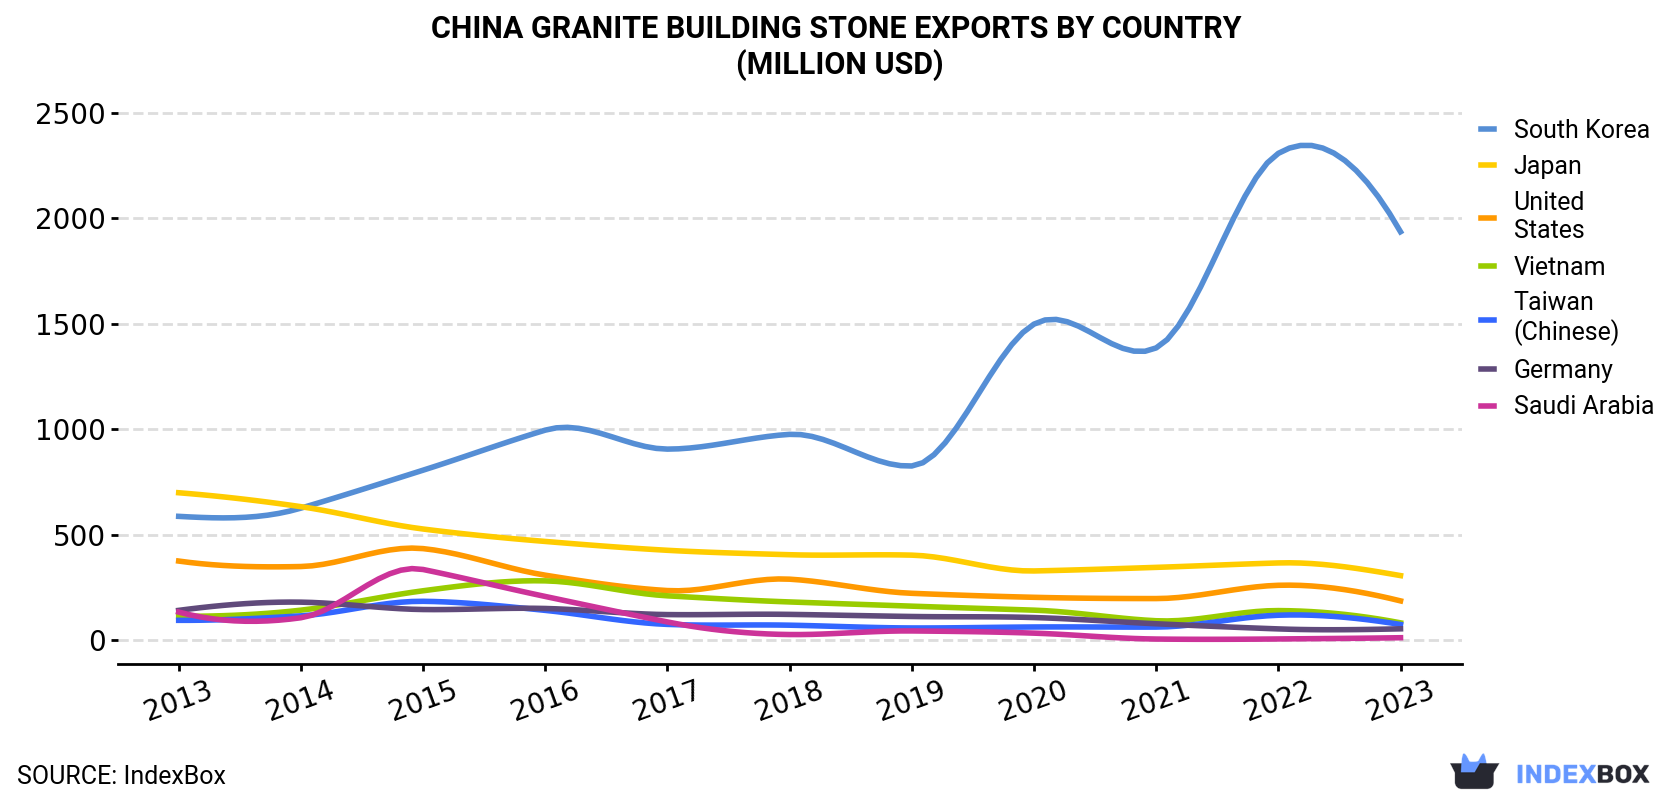 China Granite Building Stone Exports By Country (Million USD)